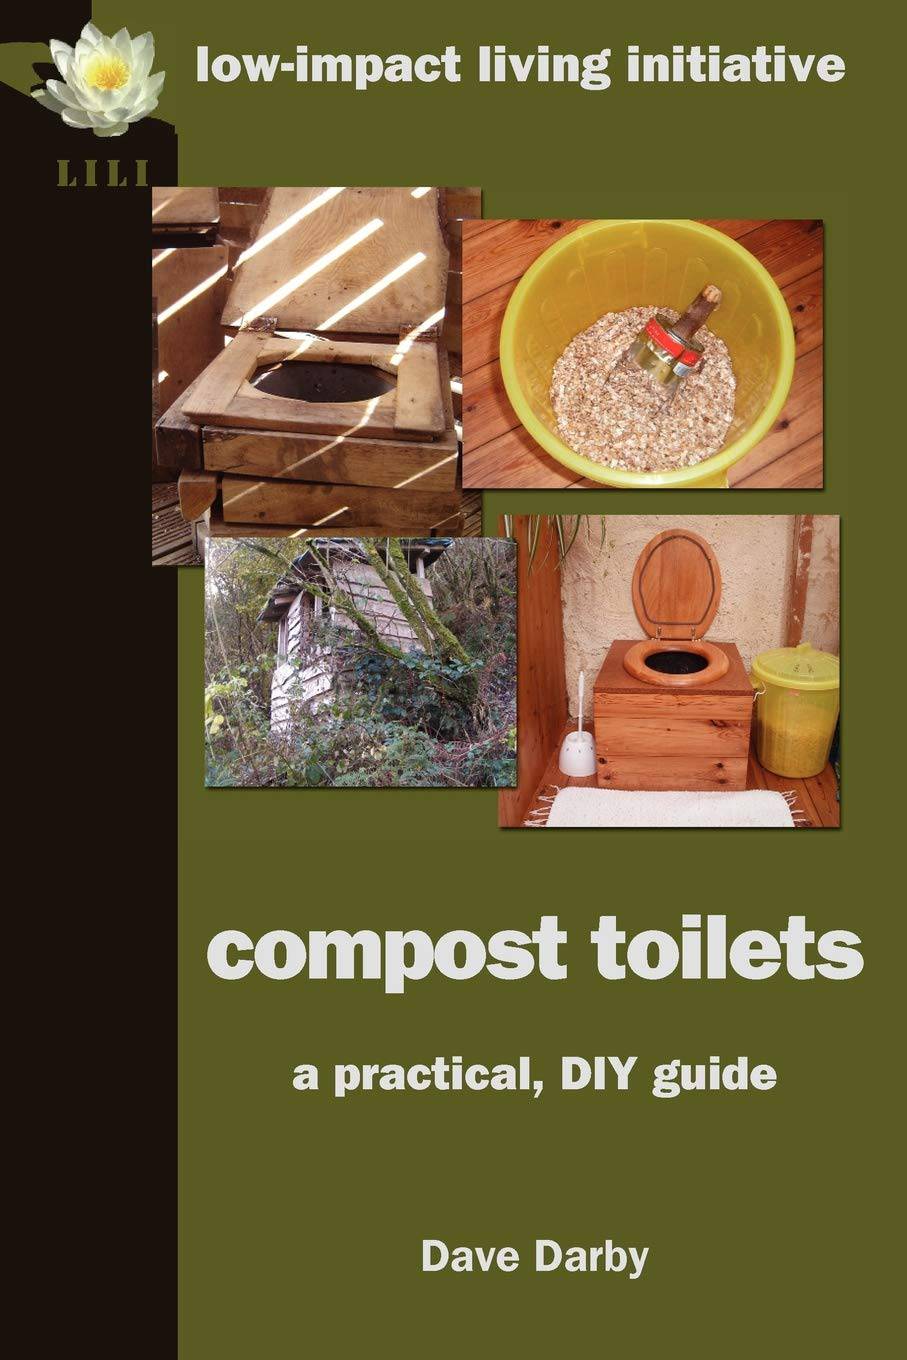 Compost toilets, a practical diy guide by Dave Darby